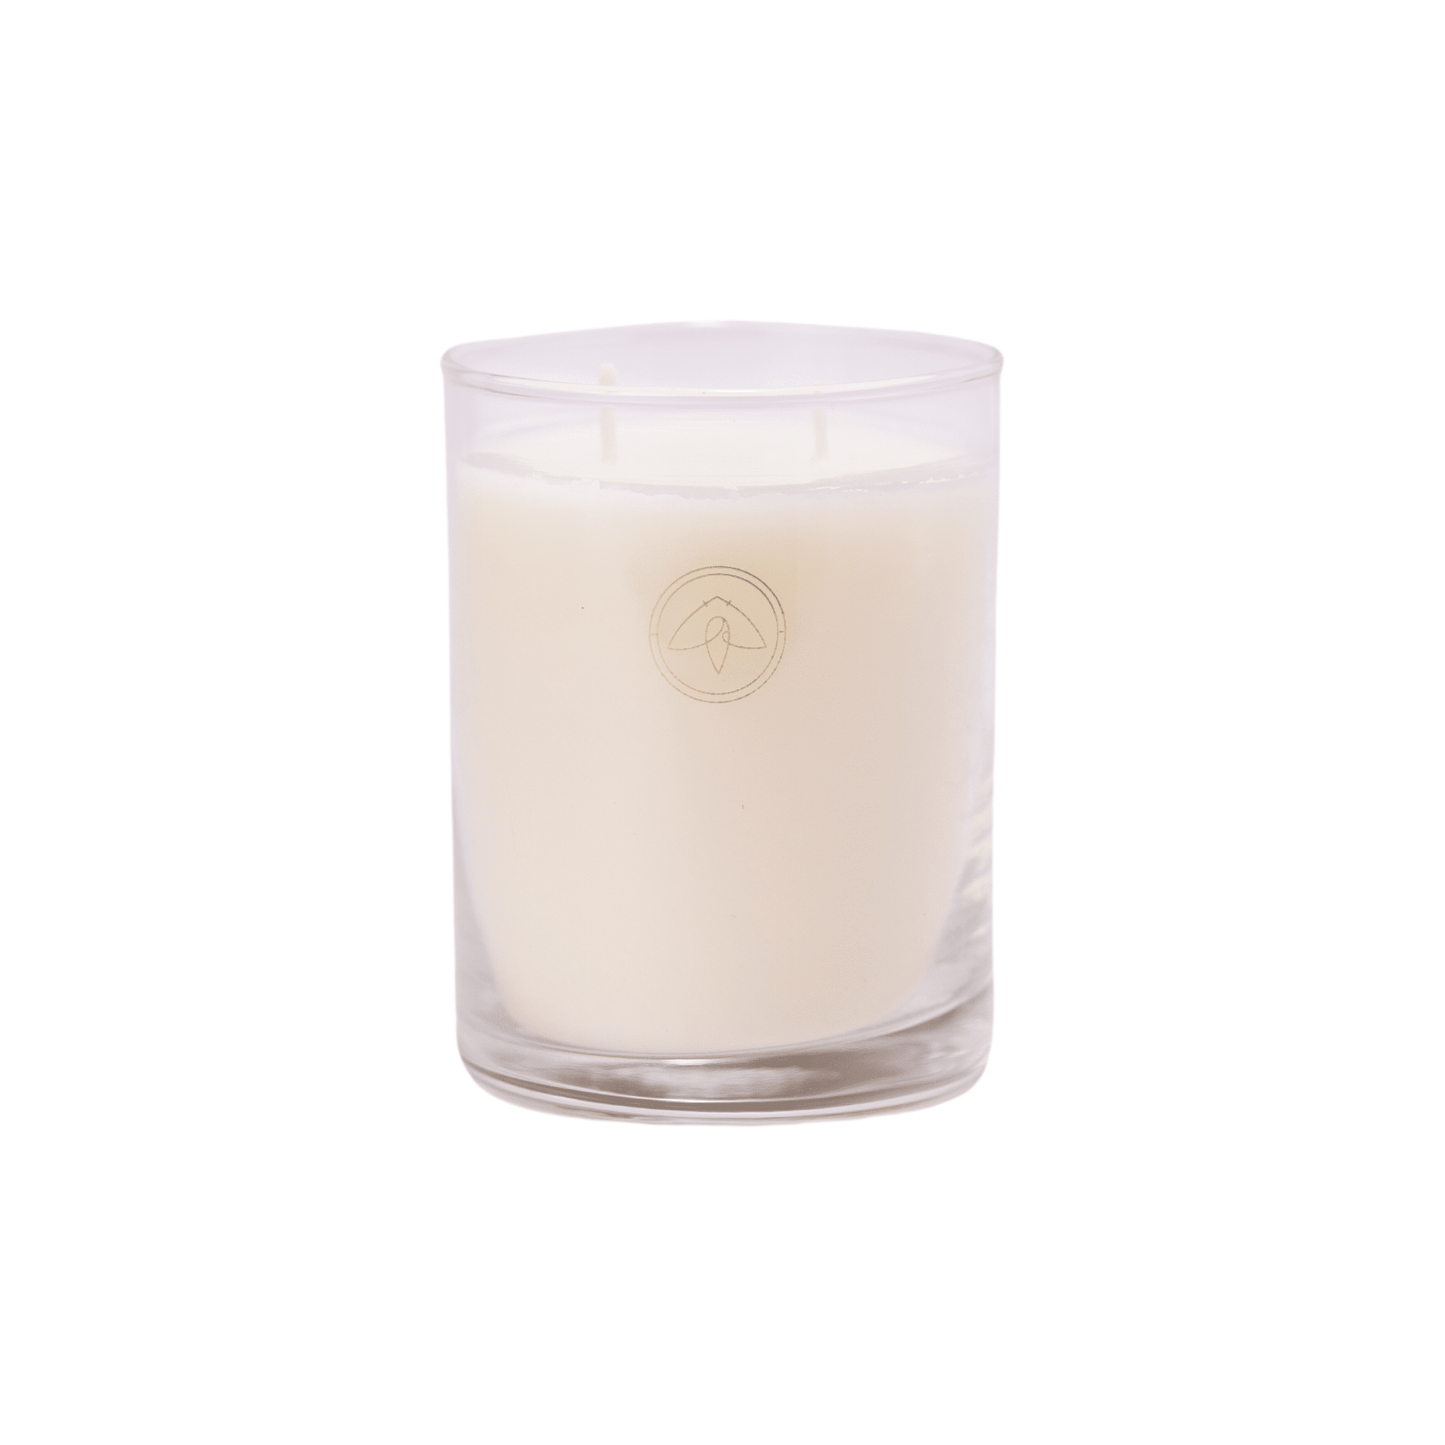 Clarity Mom's Garden - 10 oz candle in clear glass